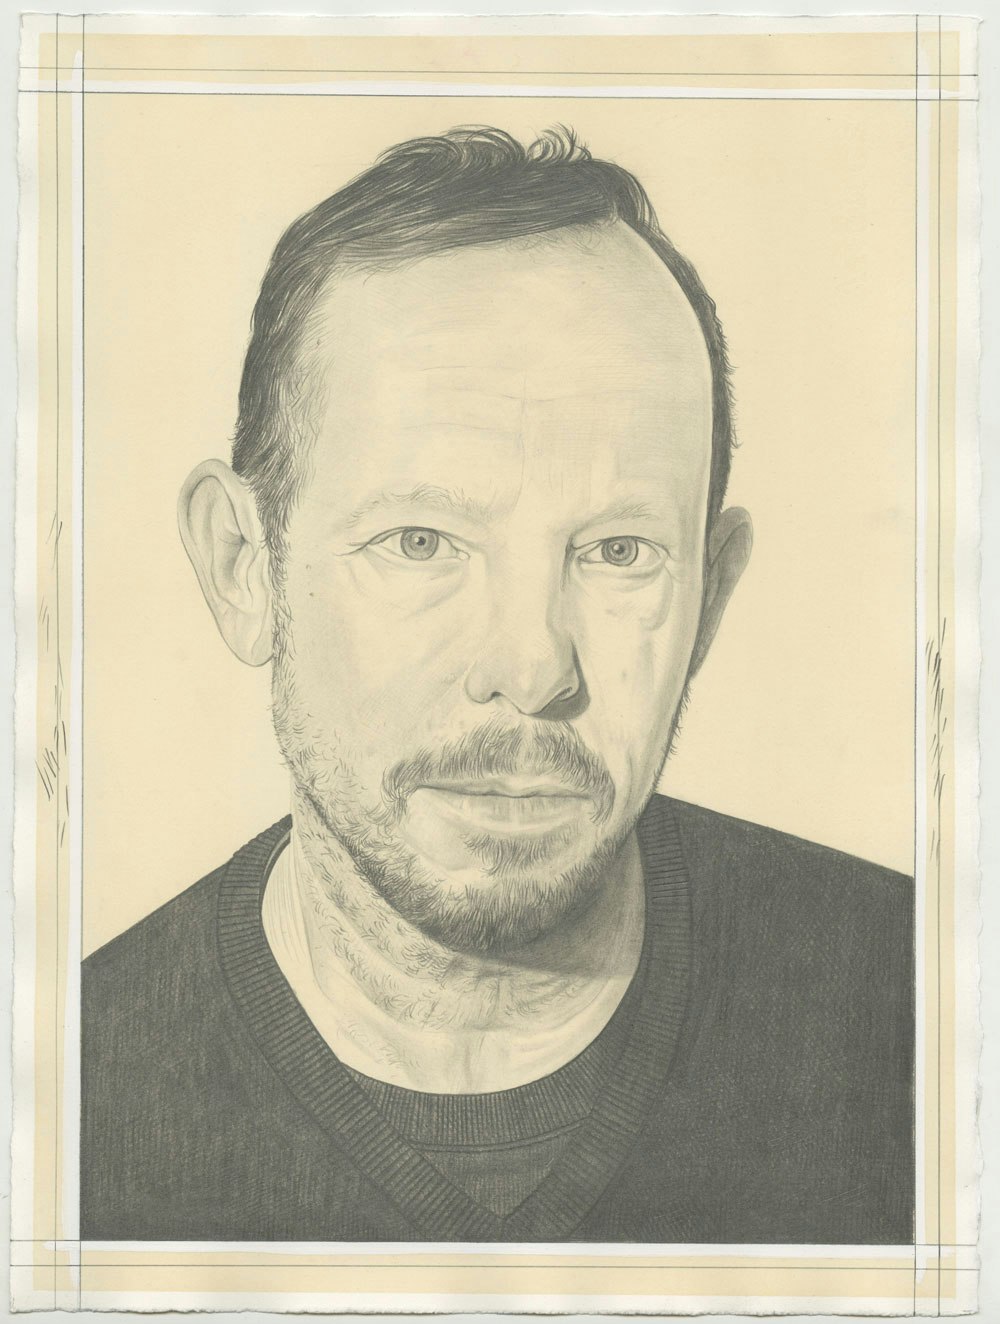 Portrait of Guillermo Kuitca, pencil on paper by Phong H. Bui.